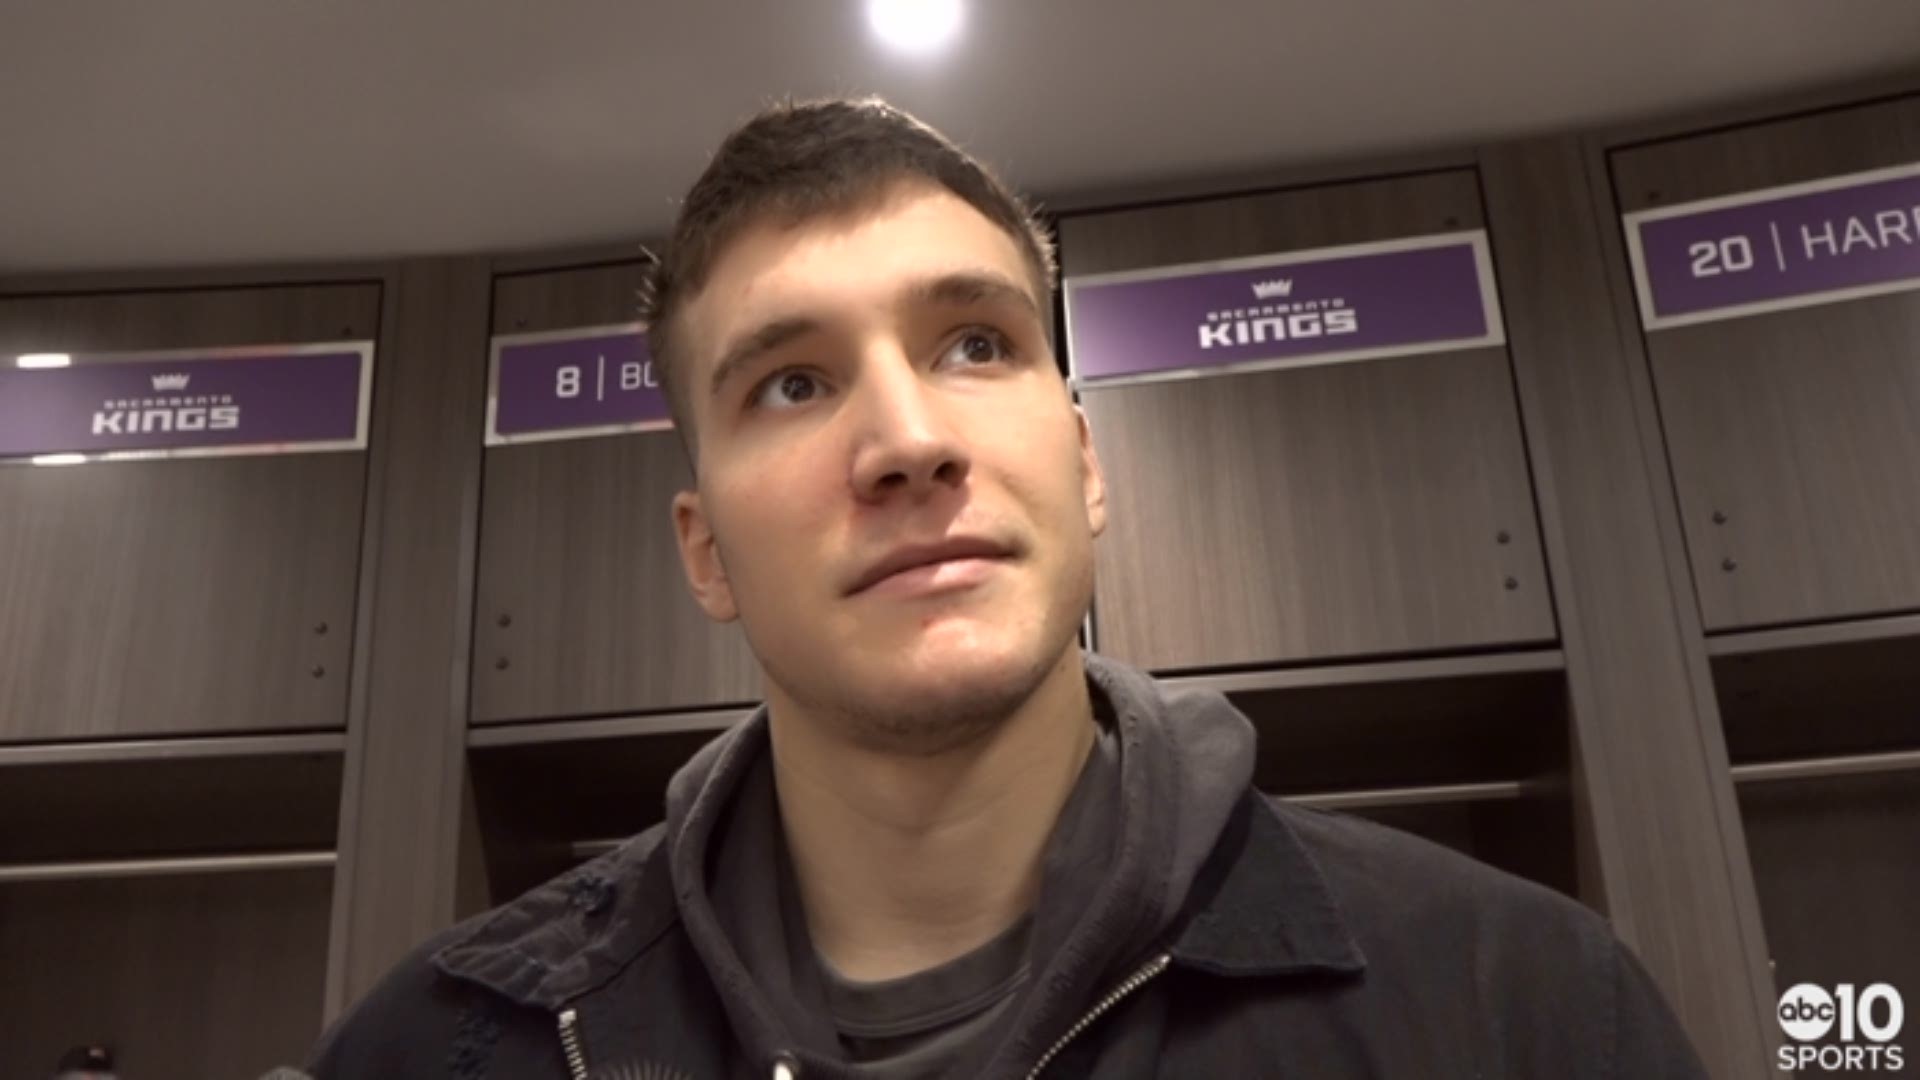 Kings guard Bogdan Bogdanovic talks about scoring his career-high 26 points but the game resulting in a loss to the Clippers, his coach wanting to play him more at point guard and the team's trouble with defending the opposition.